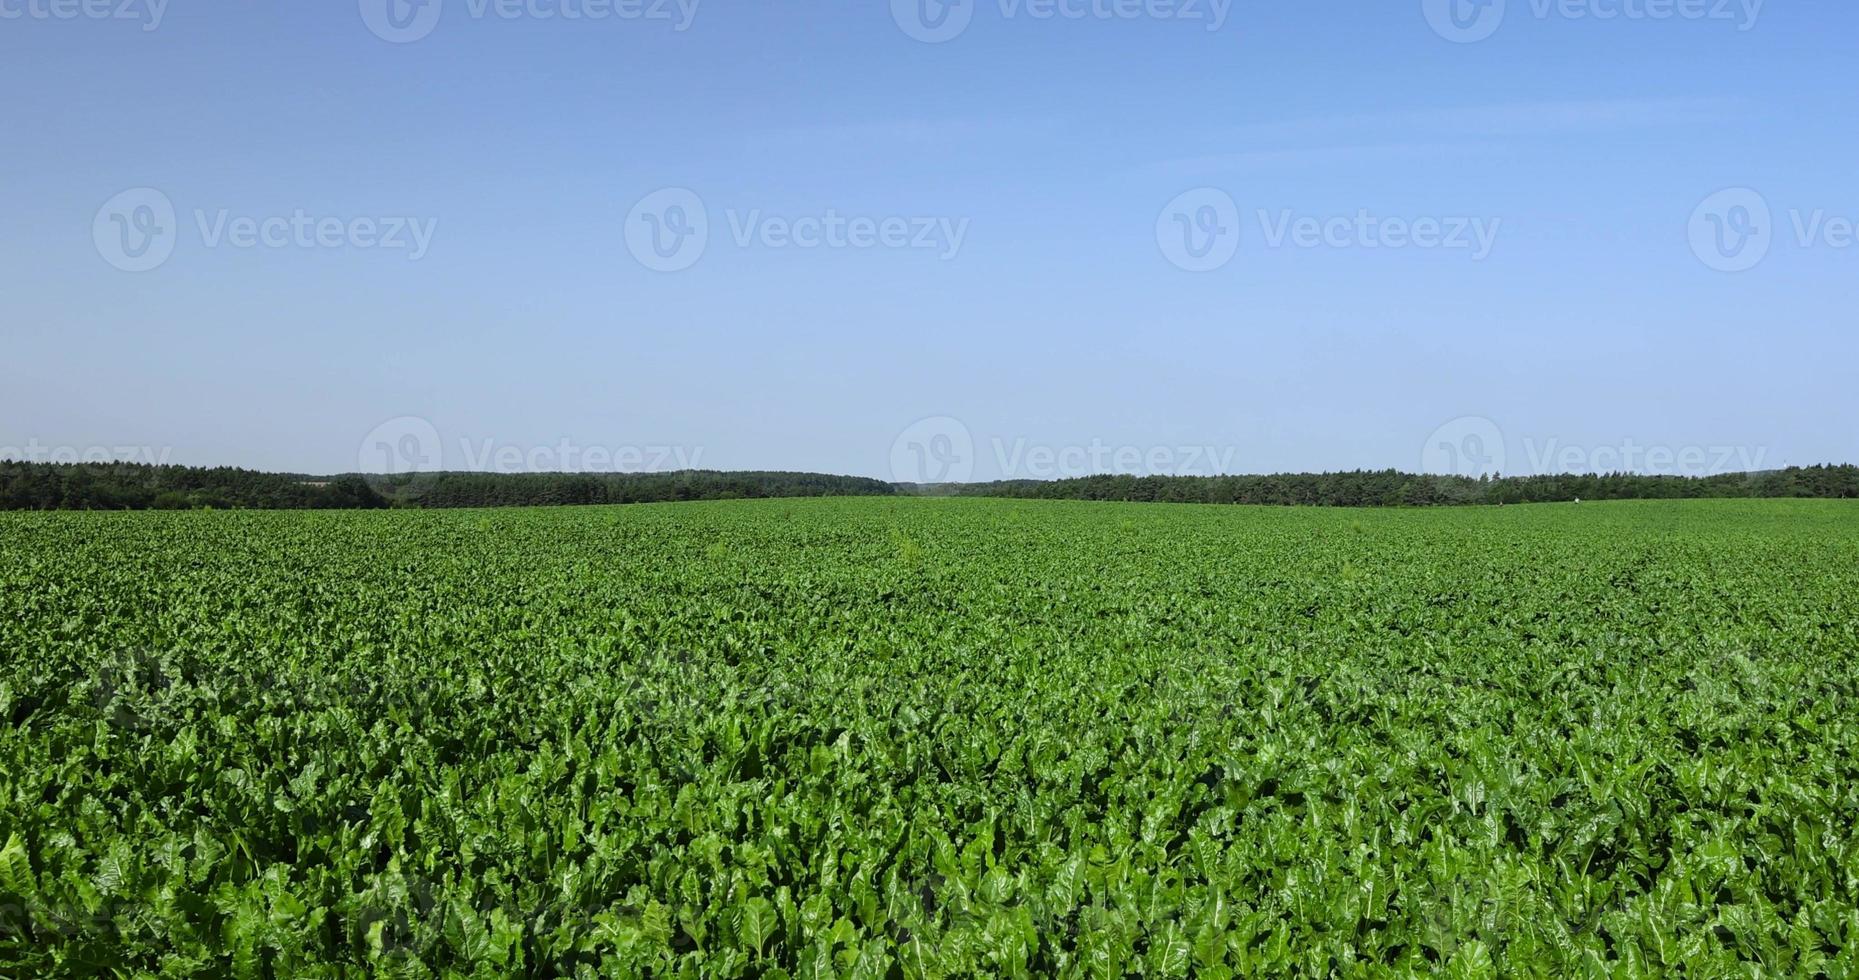 Growing beets in an agricultural field photo